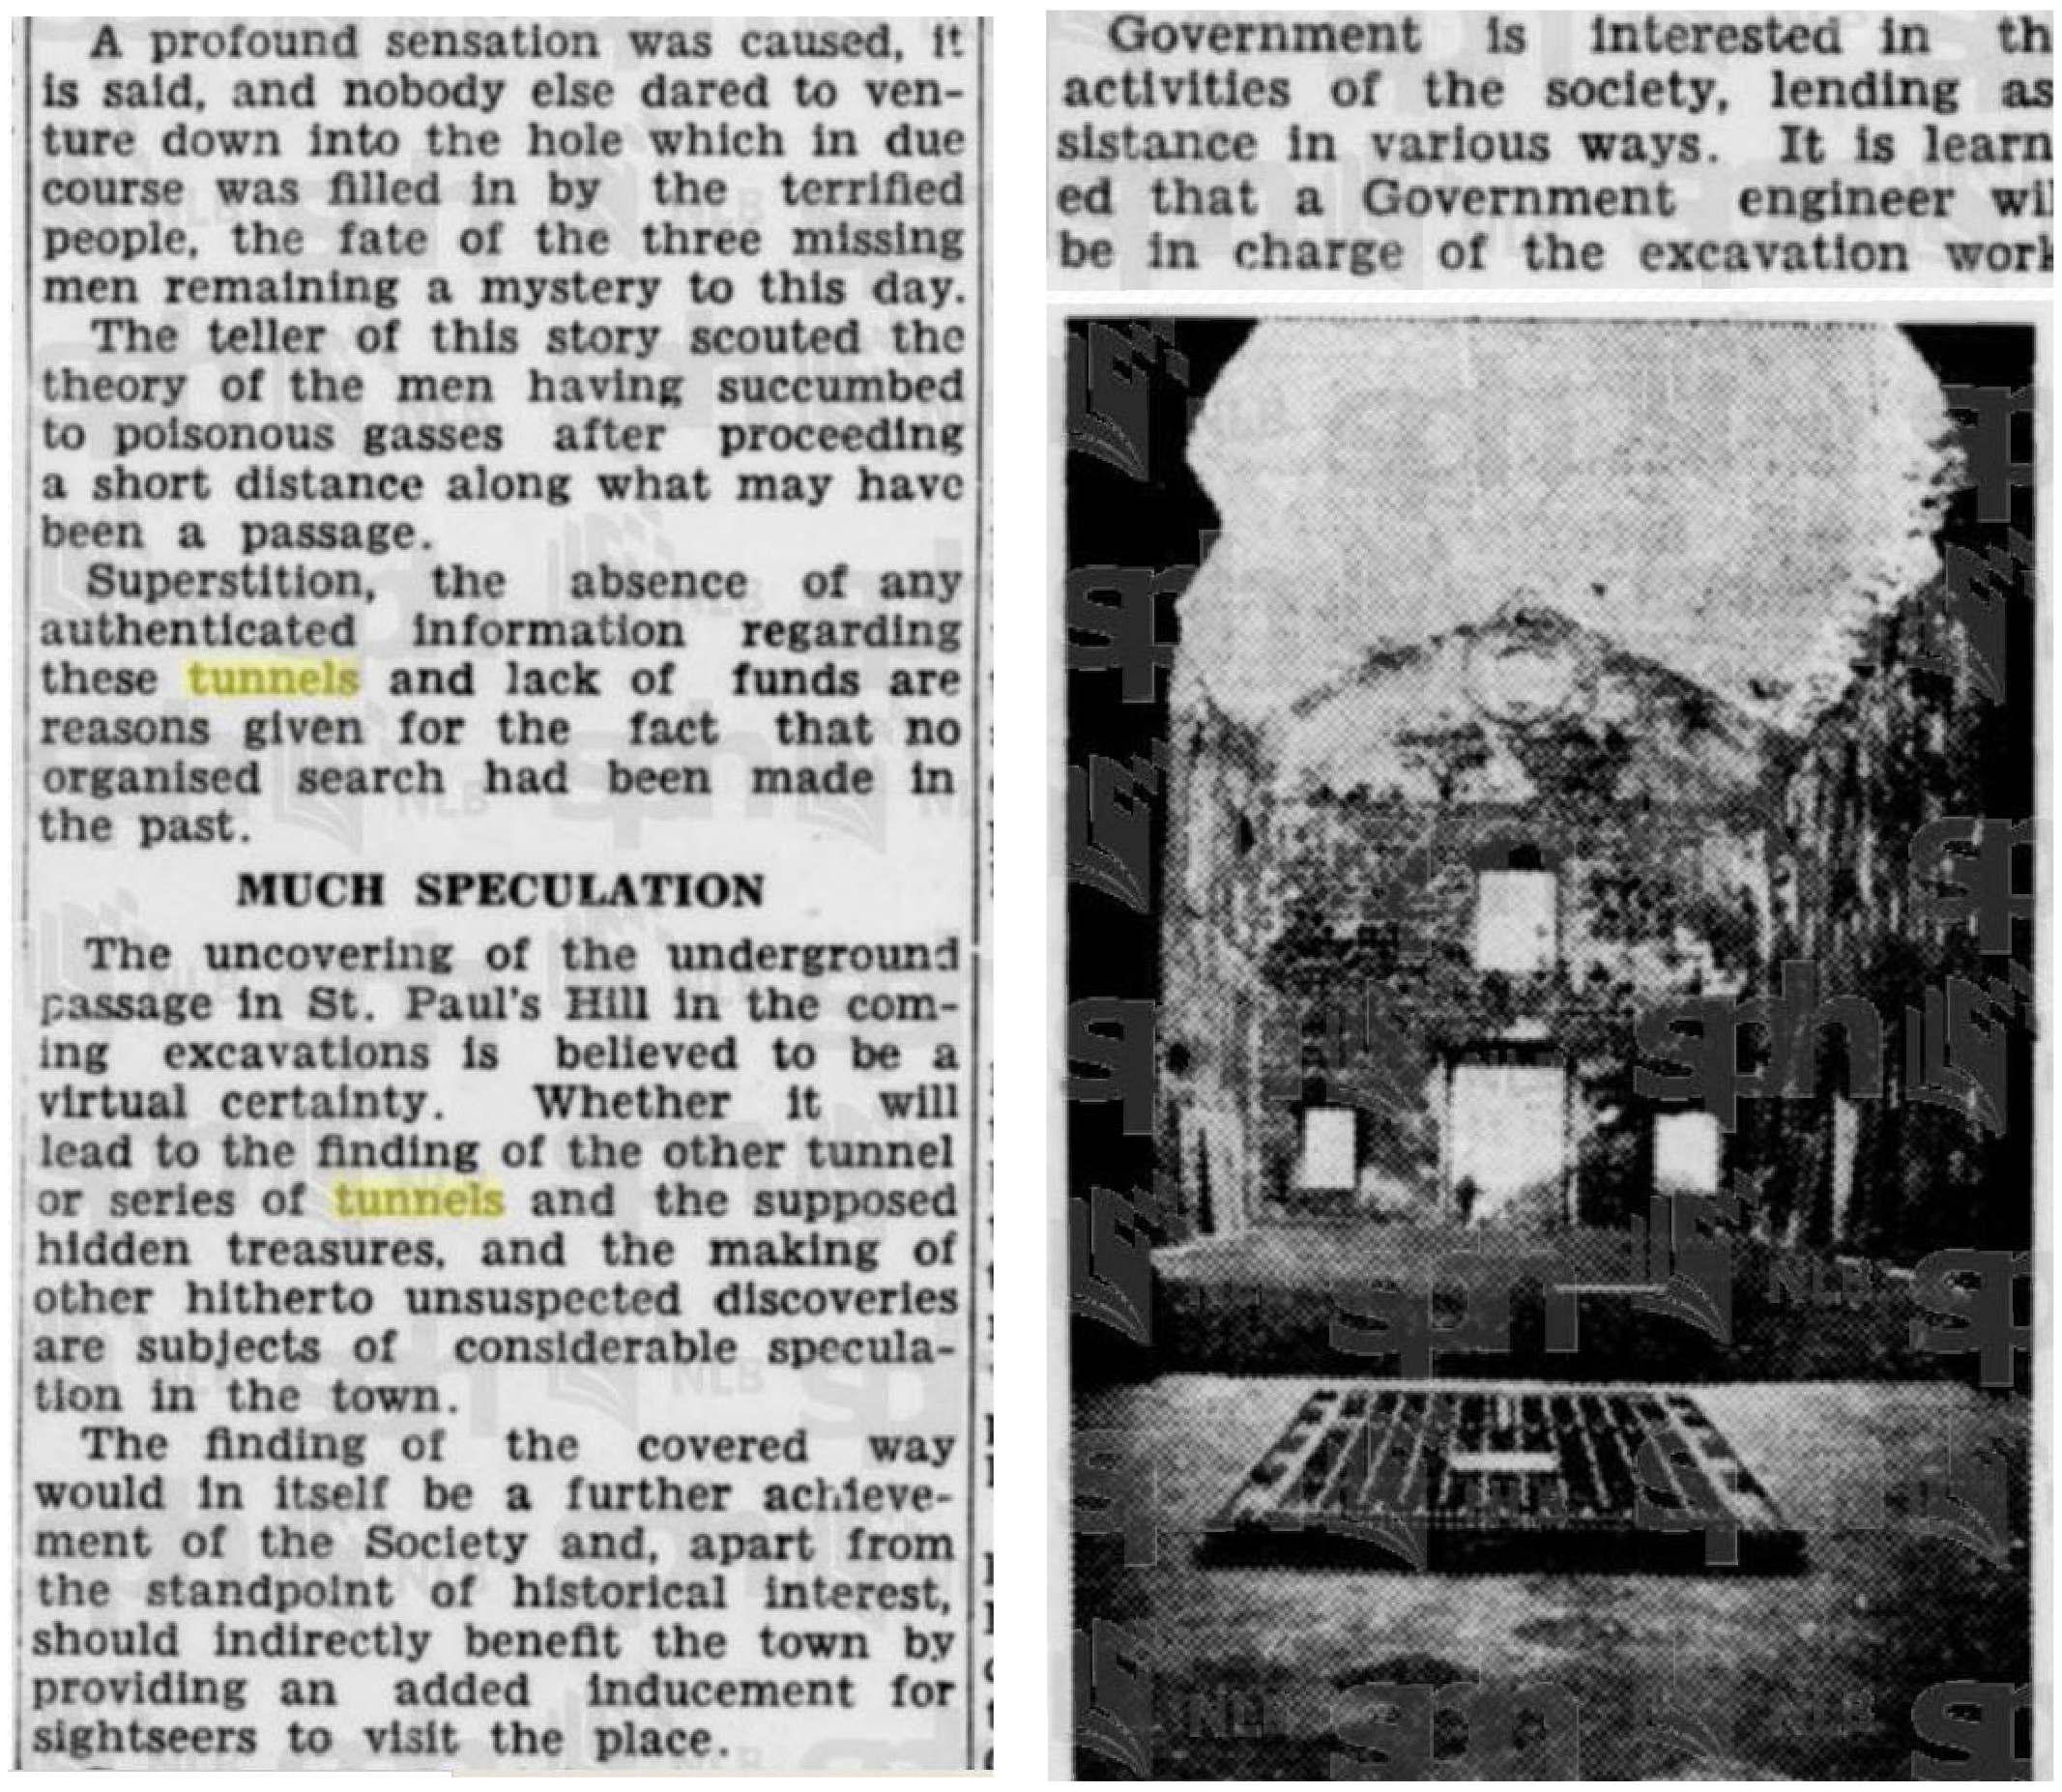 Secret underground tunnels article (source: Straits Times, February 2nd, 1936)